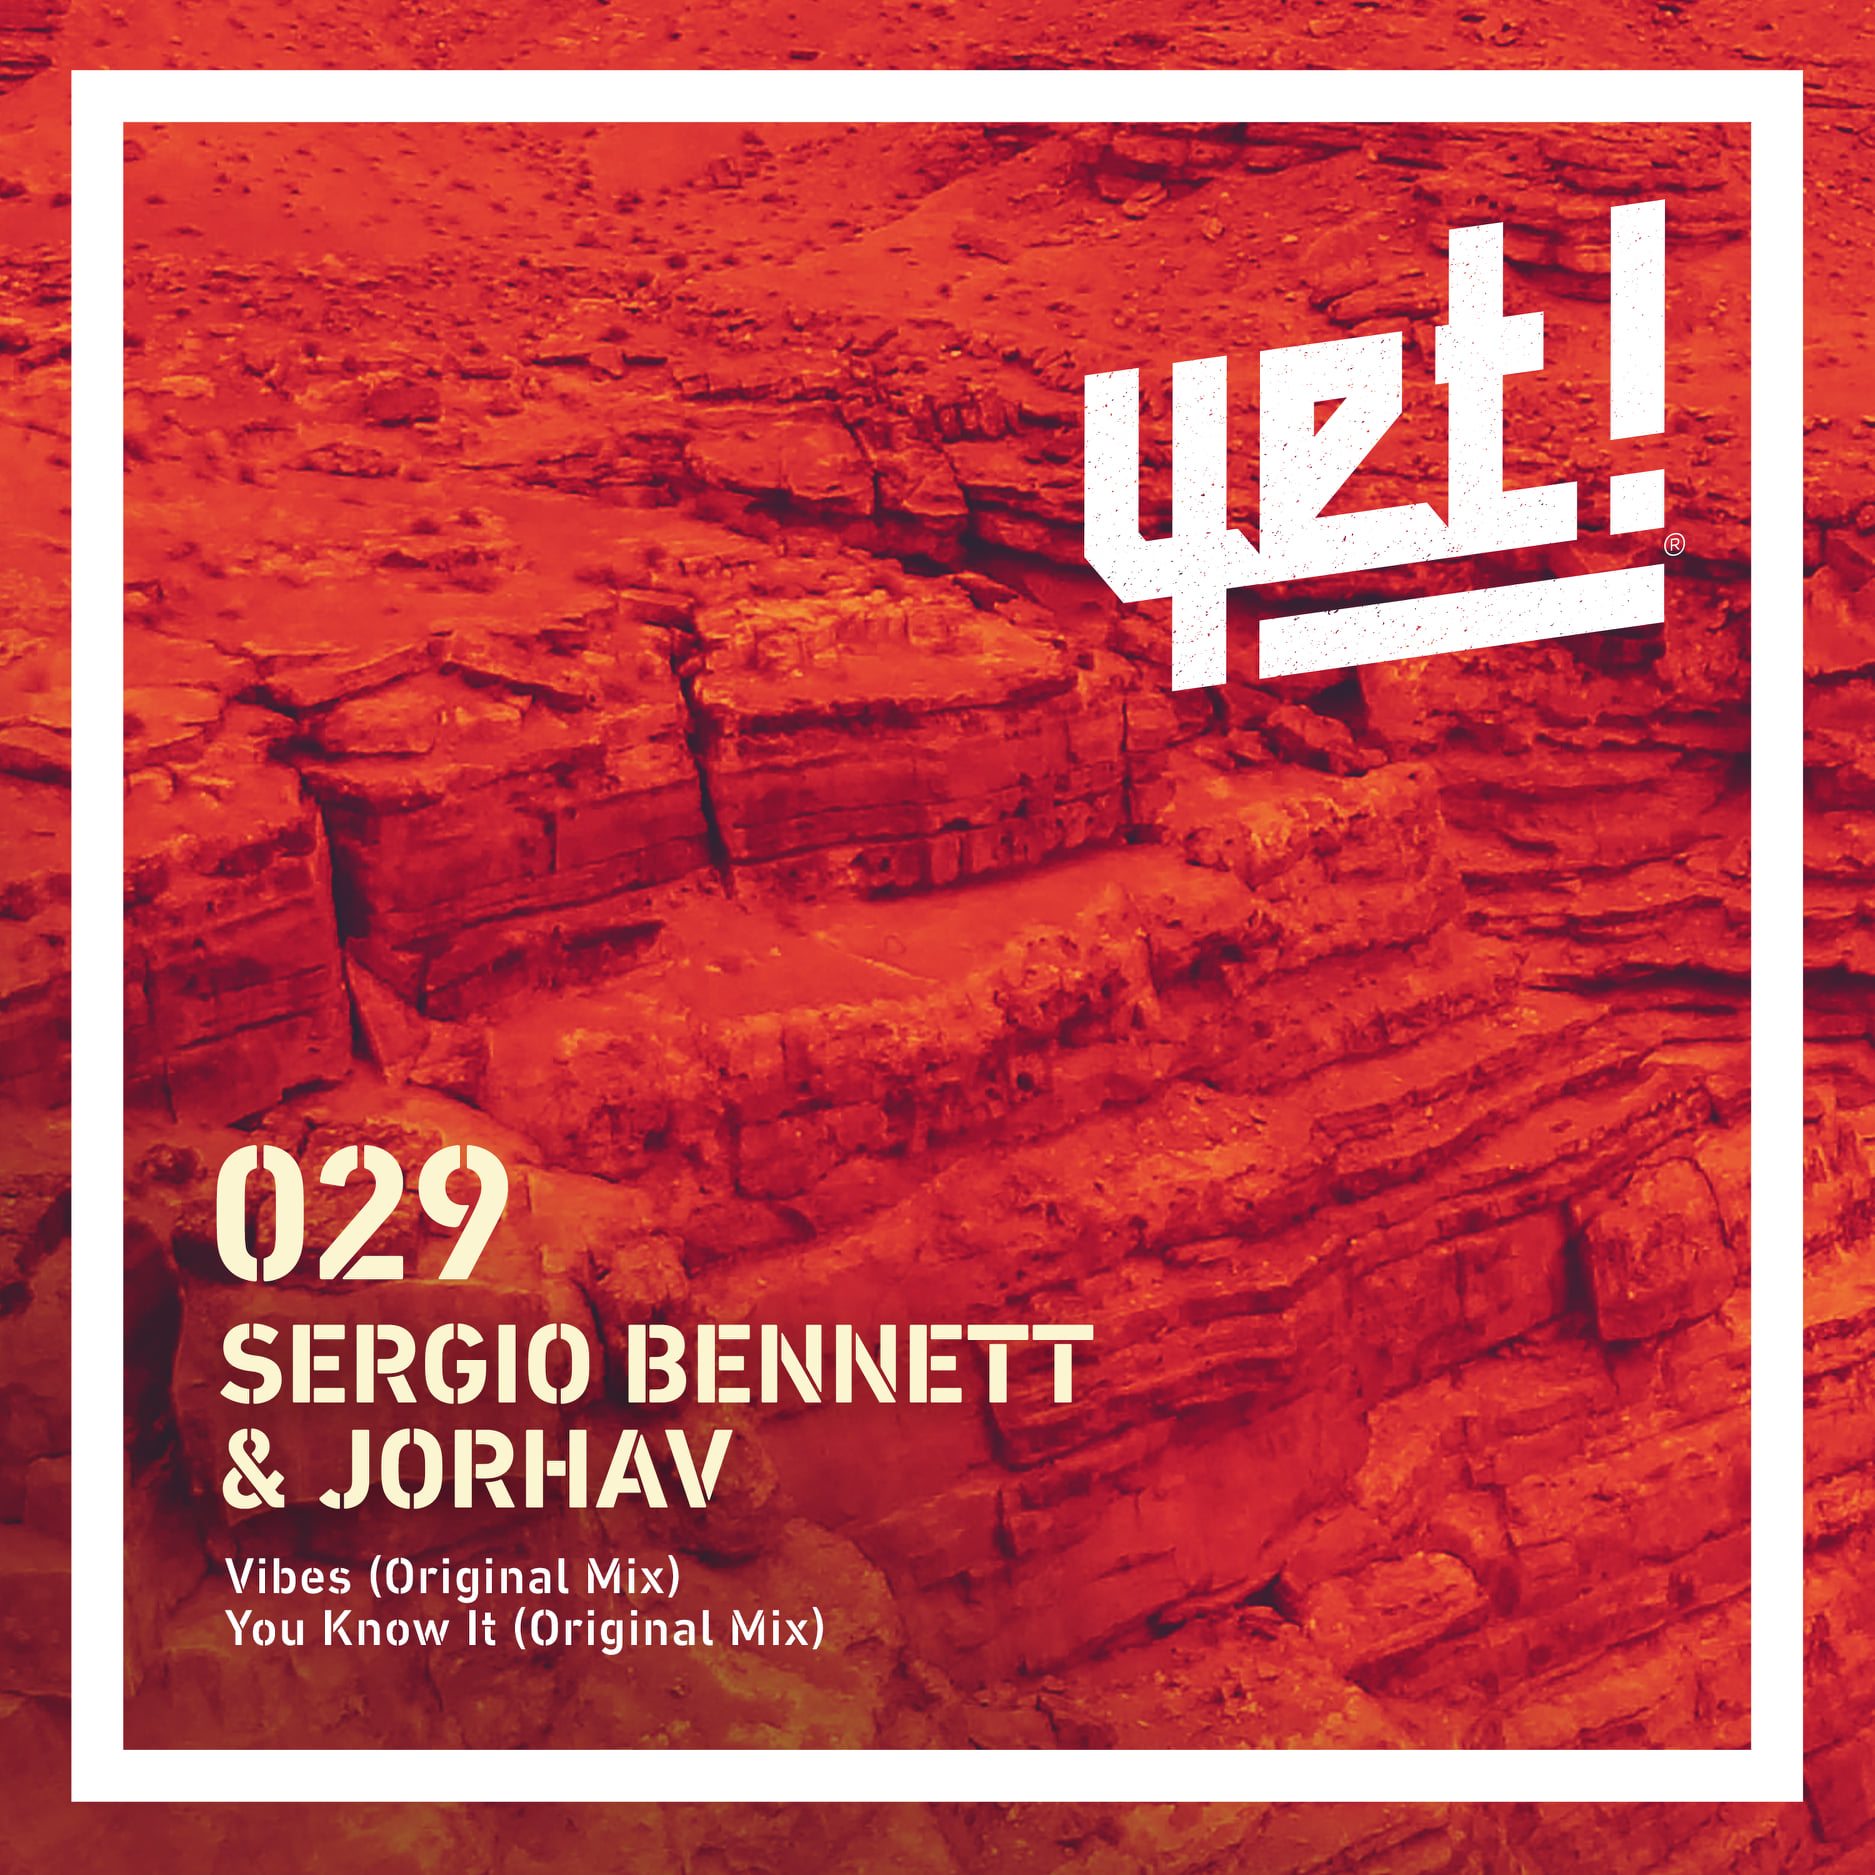 Sergio Bennett and Jorhav join forces on the new reference Vibes EP, under YET029 catalog of the transatlantic label Yet! Records.